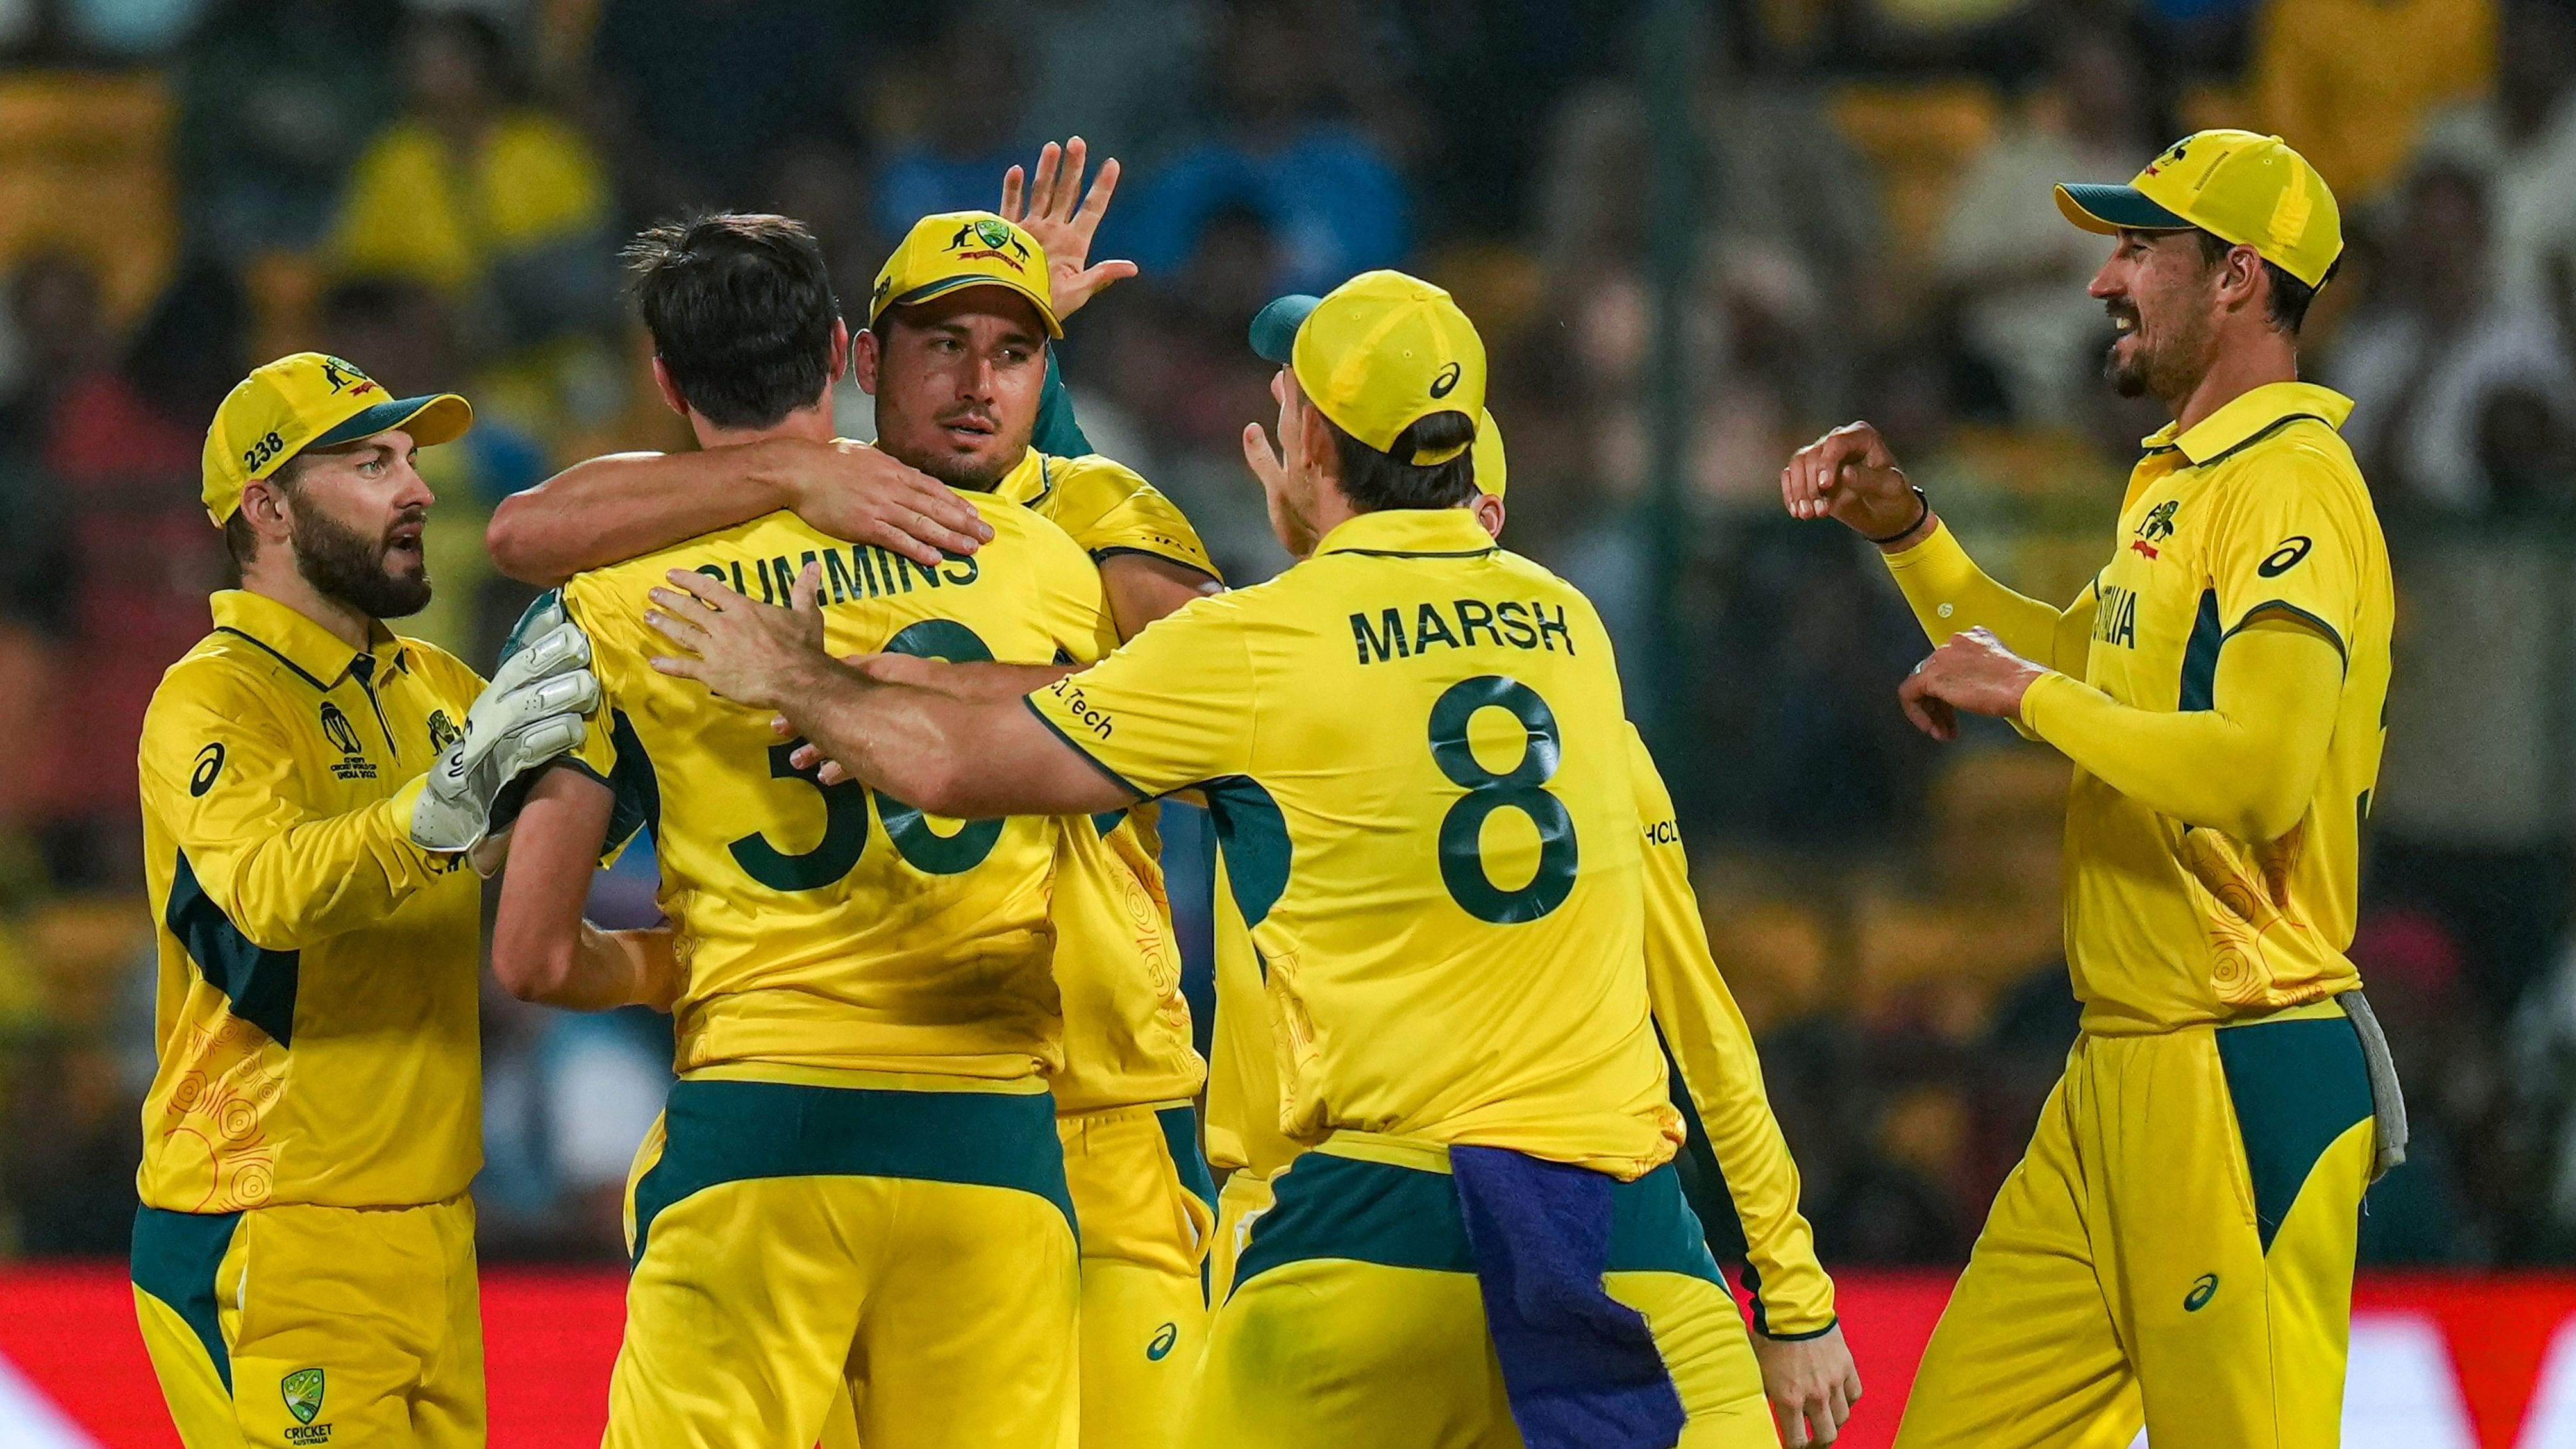 <div class="paragraphs"><p>Australia's Pat Cummins celebrates with teammates after taking the wicket of Pakistan's Saud Shakeel during the ICC Men's Cricket World Cup 2023 match between Pakistan and Australia at M. Chinnaswamy Stadium, in Bengaluru, Friday, Oct. 20, 2023.</p></div>